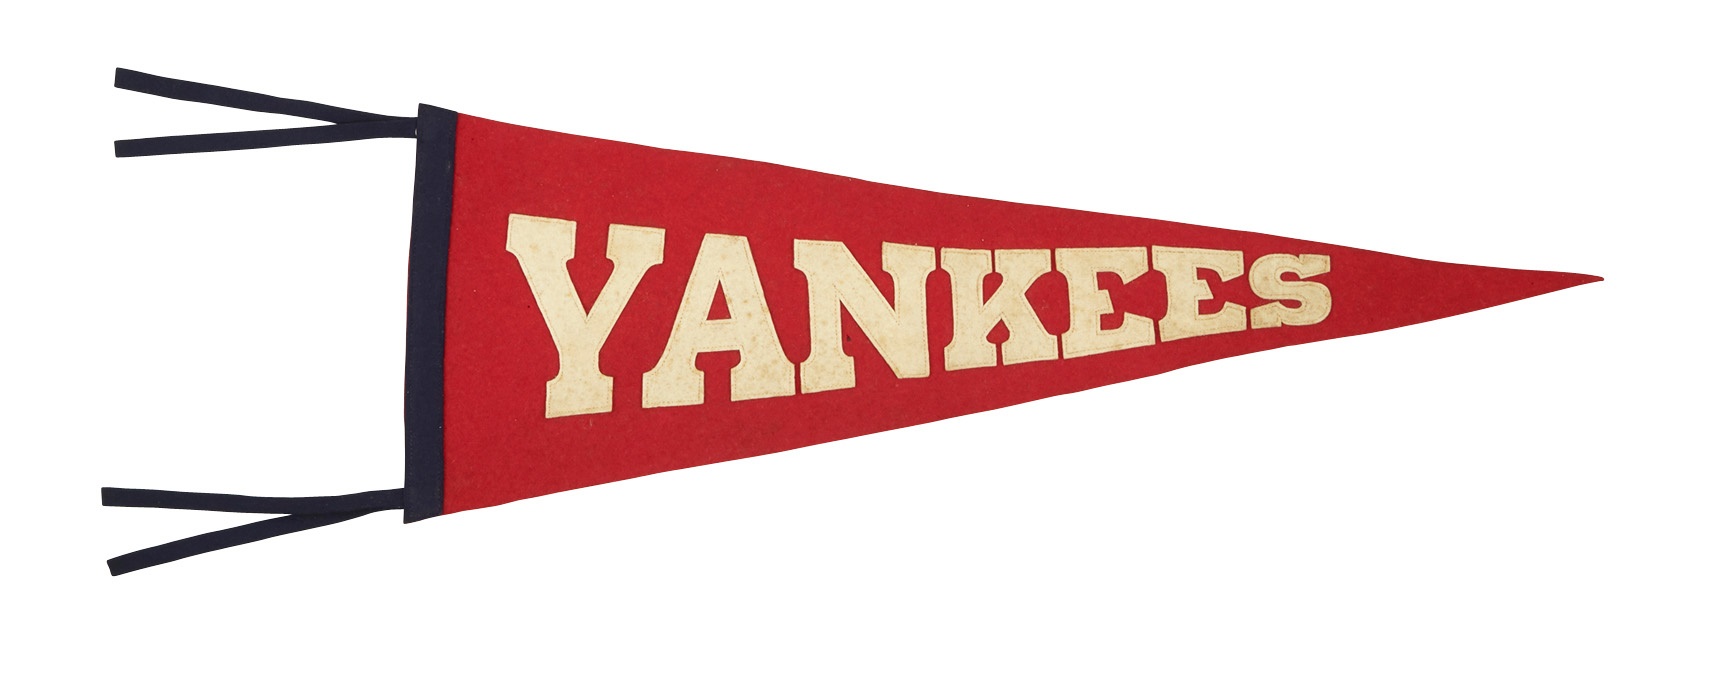 - Extremely Early New York Yankees Pennant With Sewn-On Letters